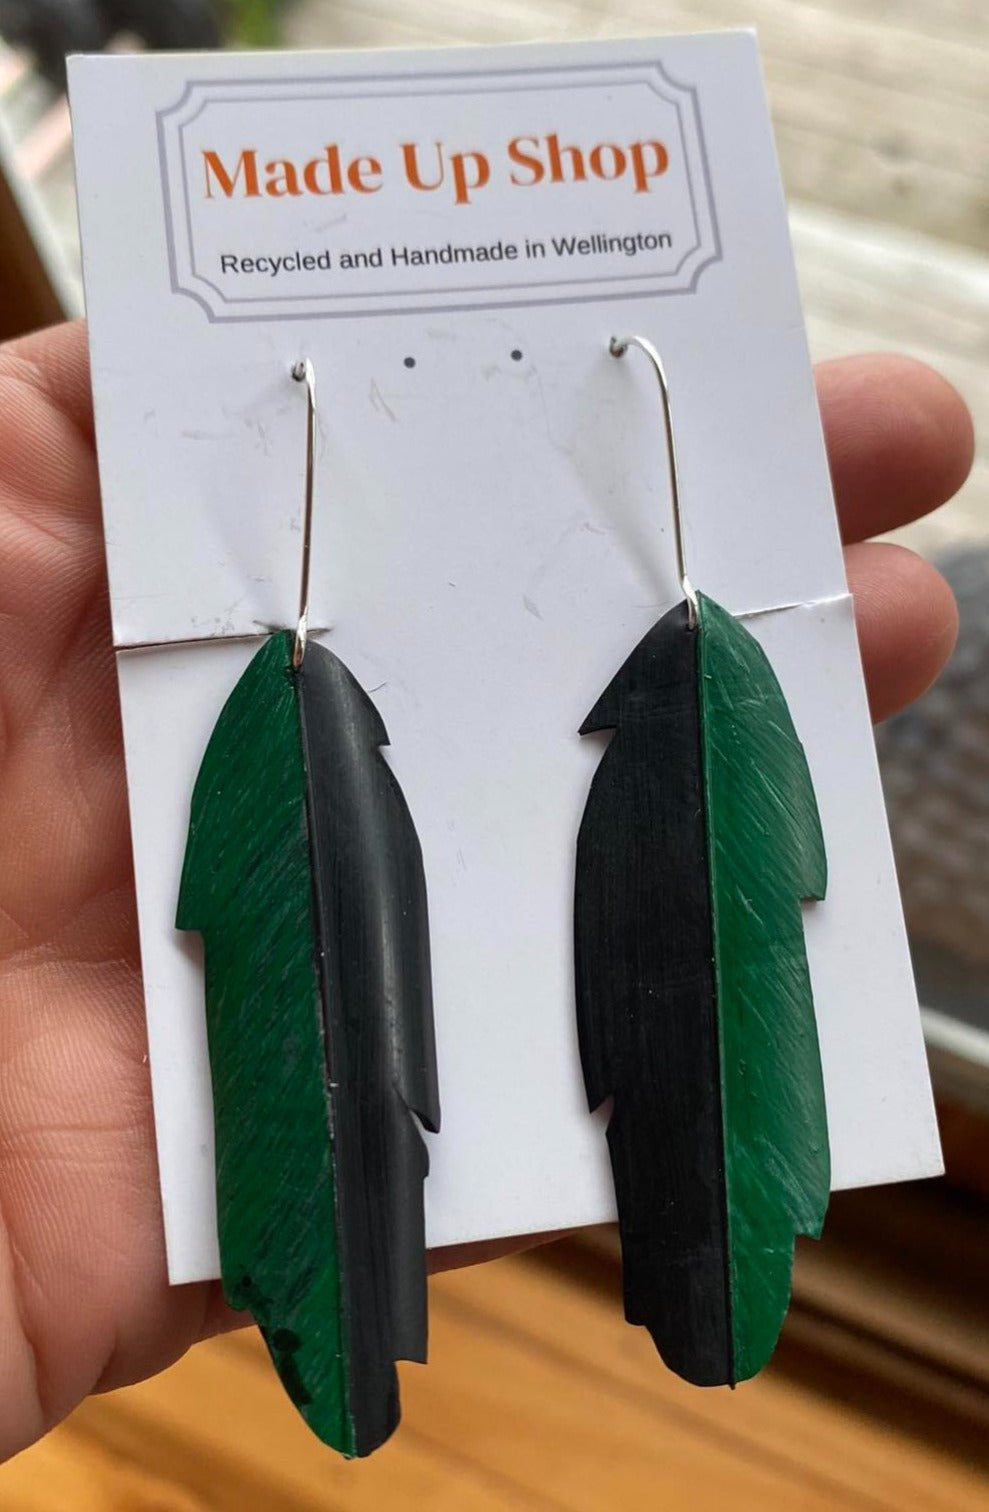 Limited edition Green Recycled bike tire earrings